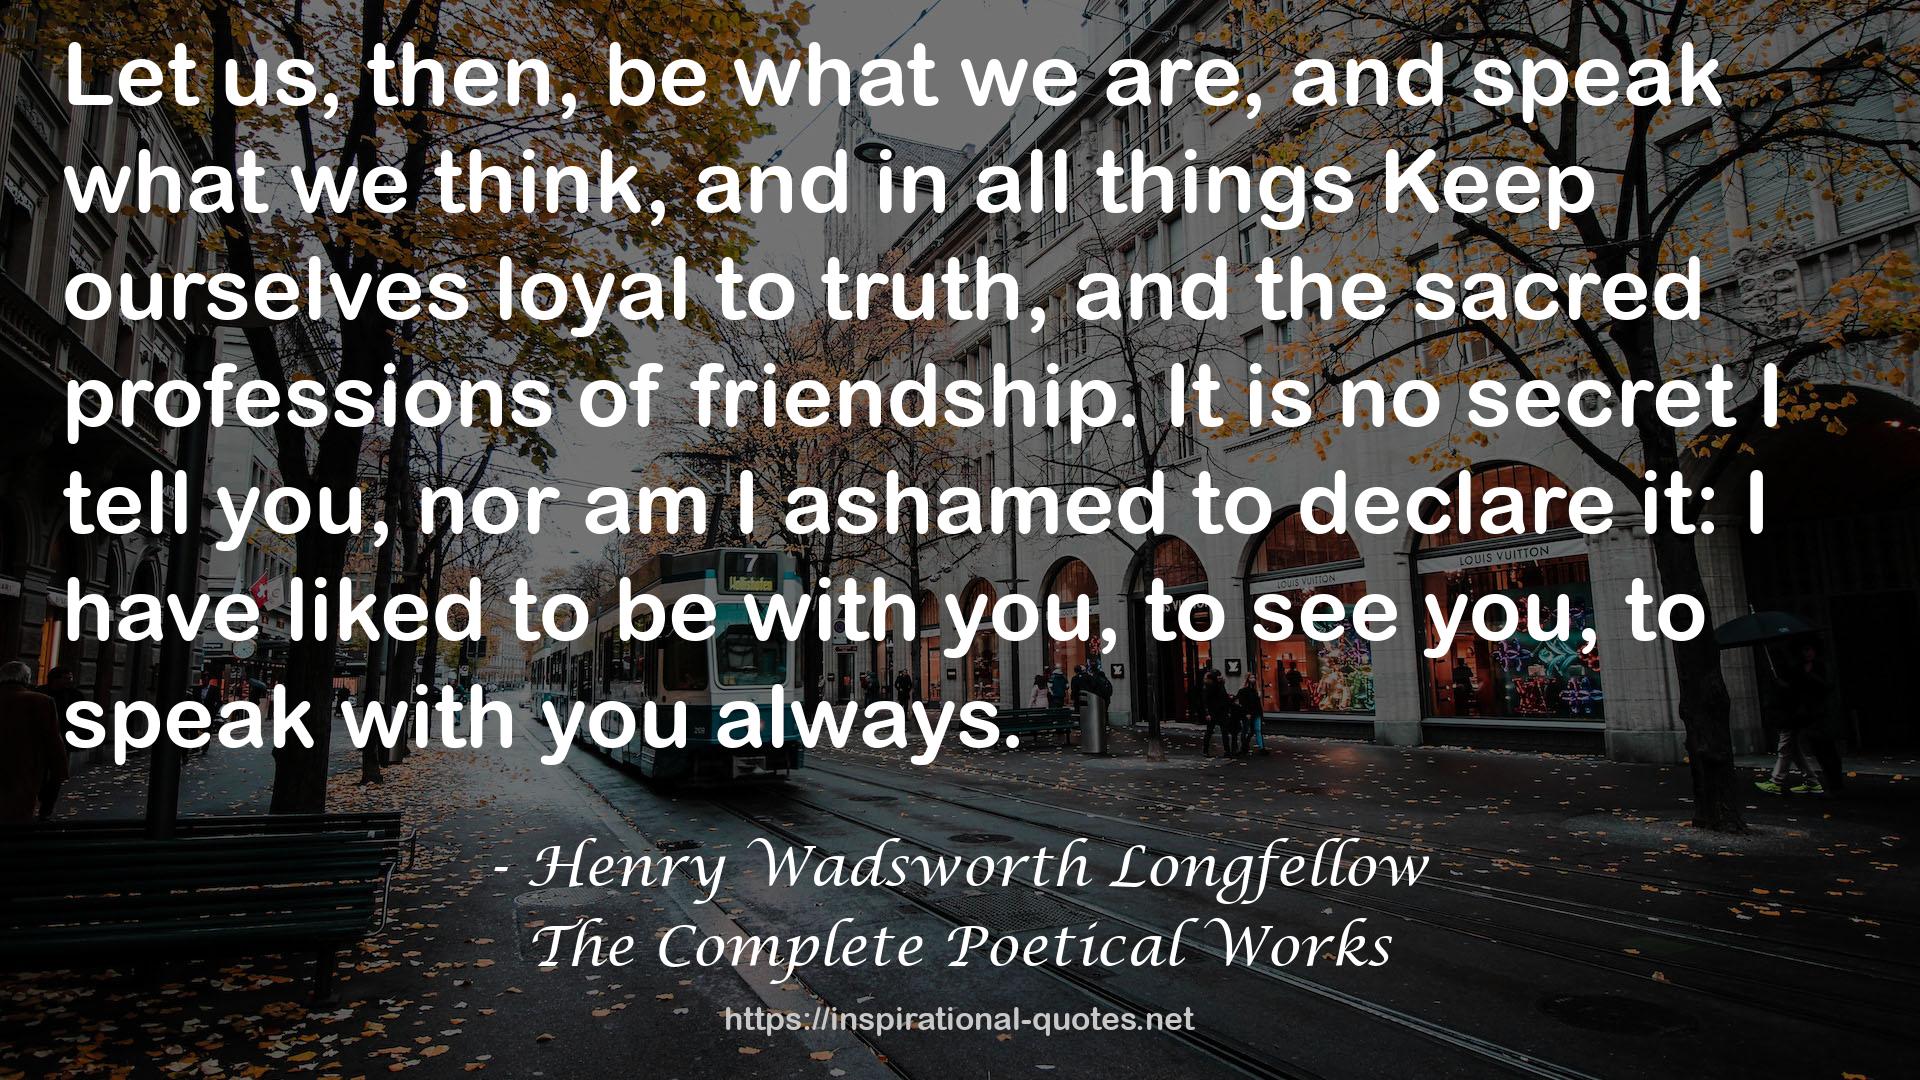 The Complete Poetical Works QUOTES